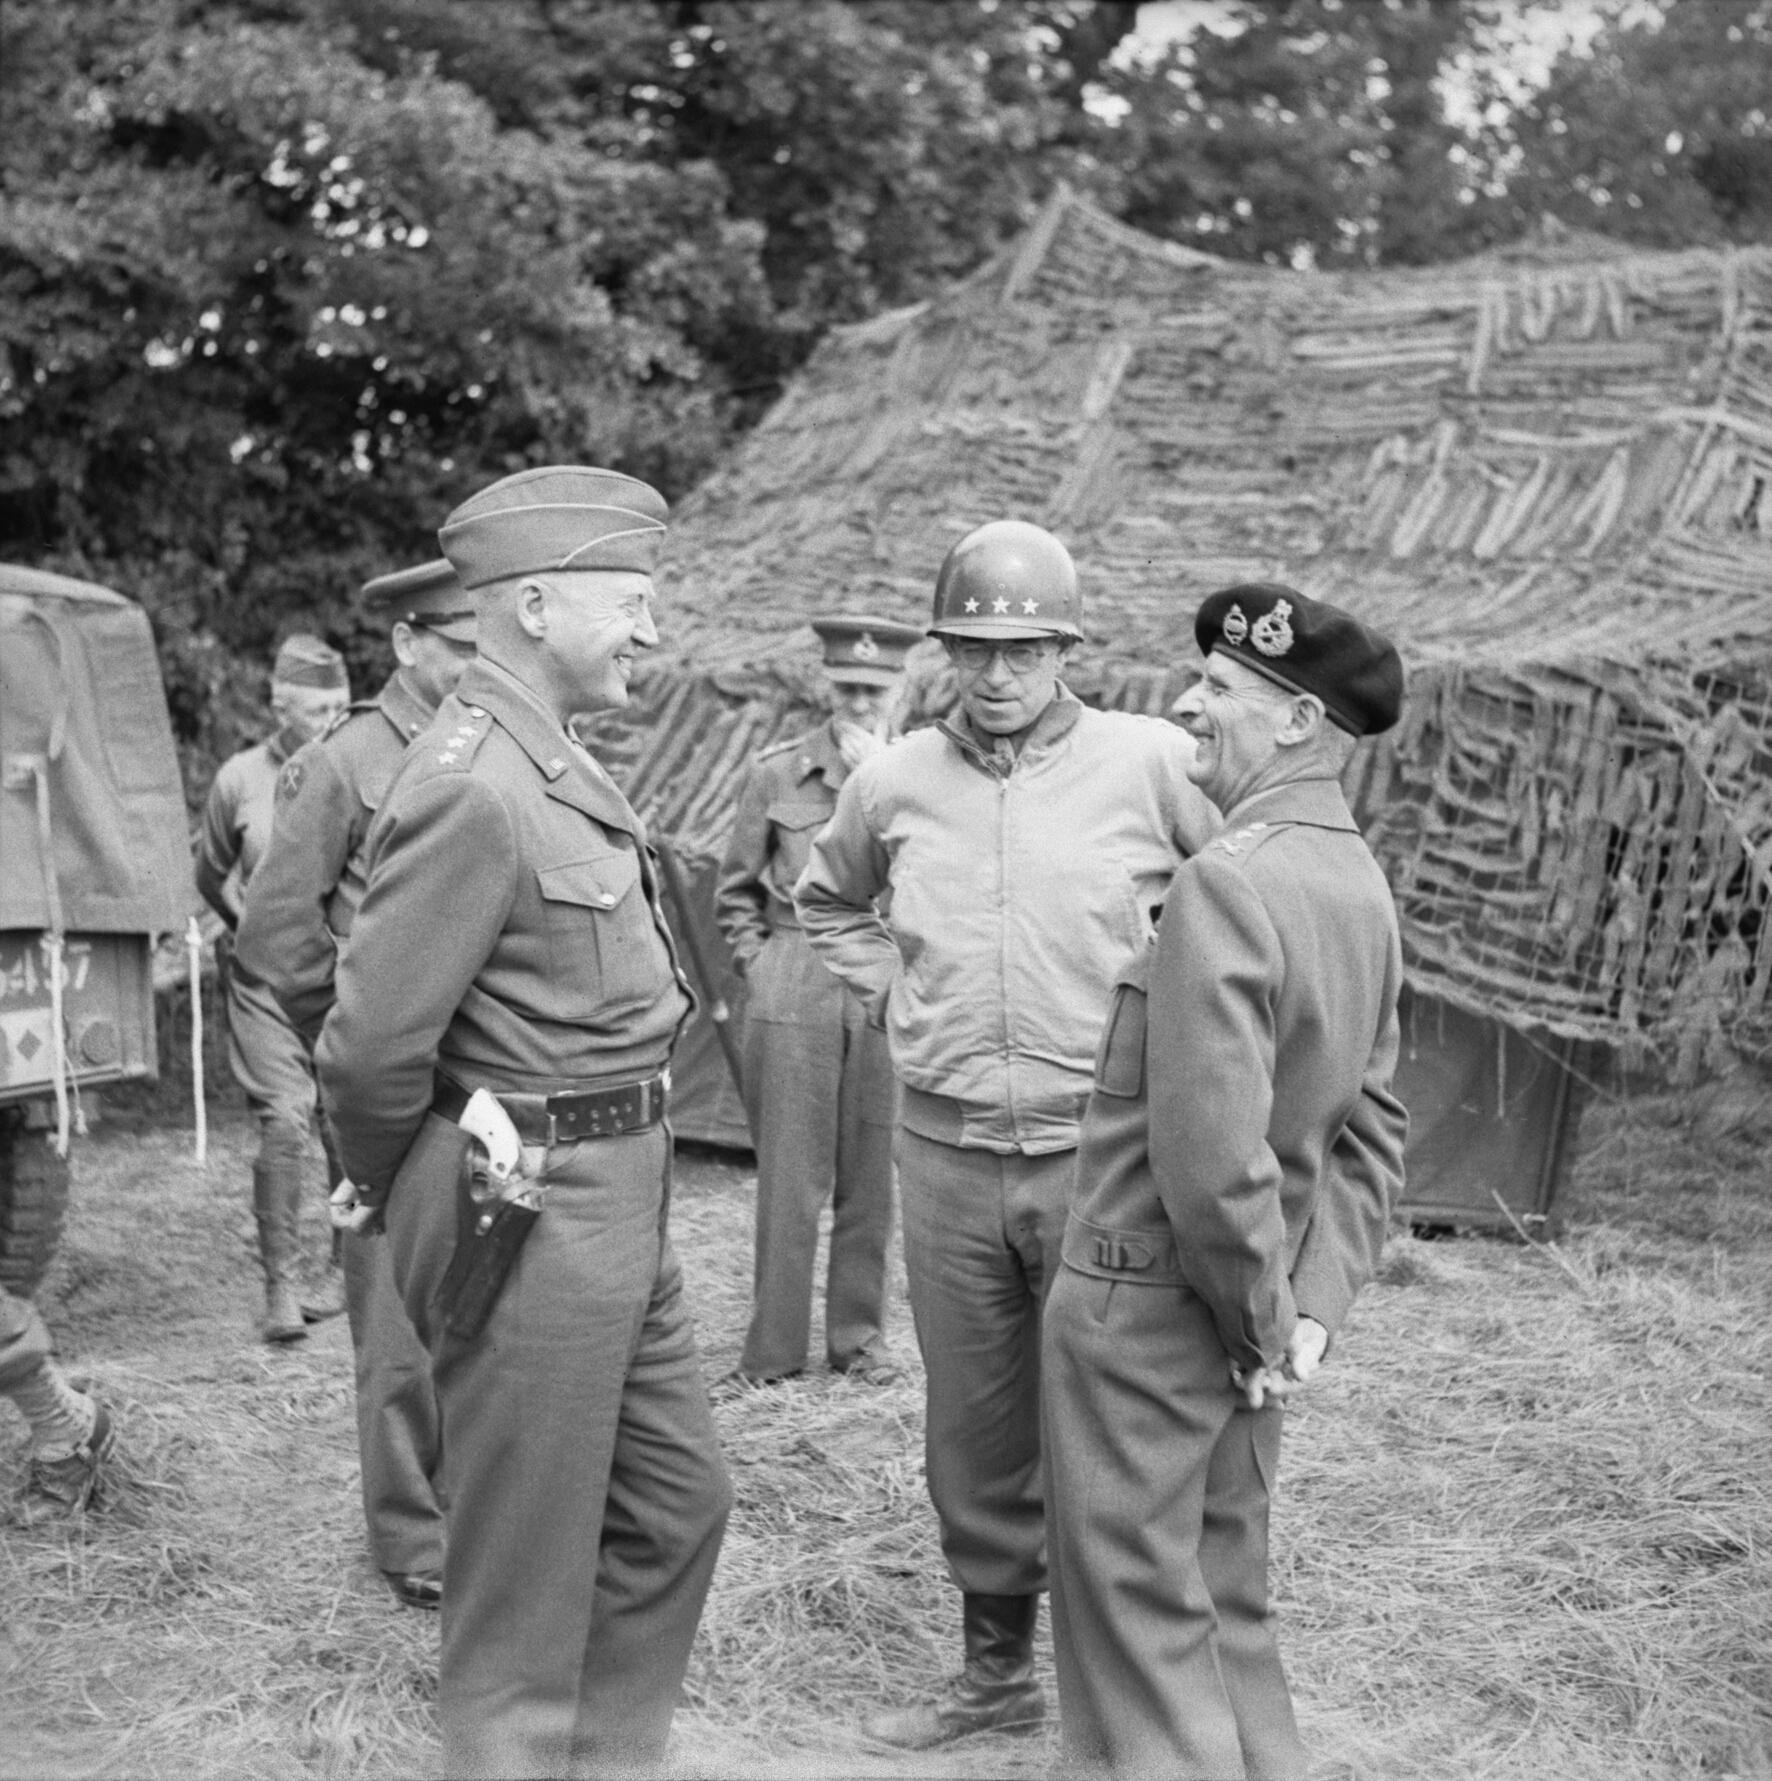 Generals George Patton, Omar Bradley, and Bernard Montgomery meeting at Montgomery’s headquarters at Blay, Normandy, France, 7 Jul 1944. Patton and Montgomery seem to be enjoying a tense laugh.